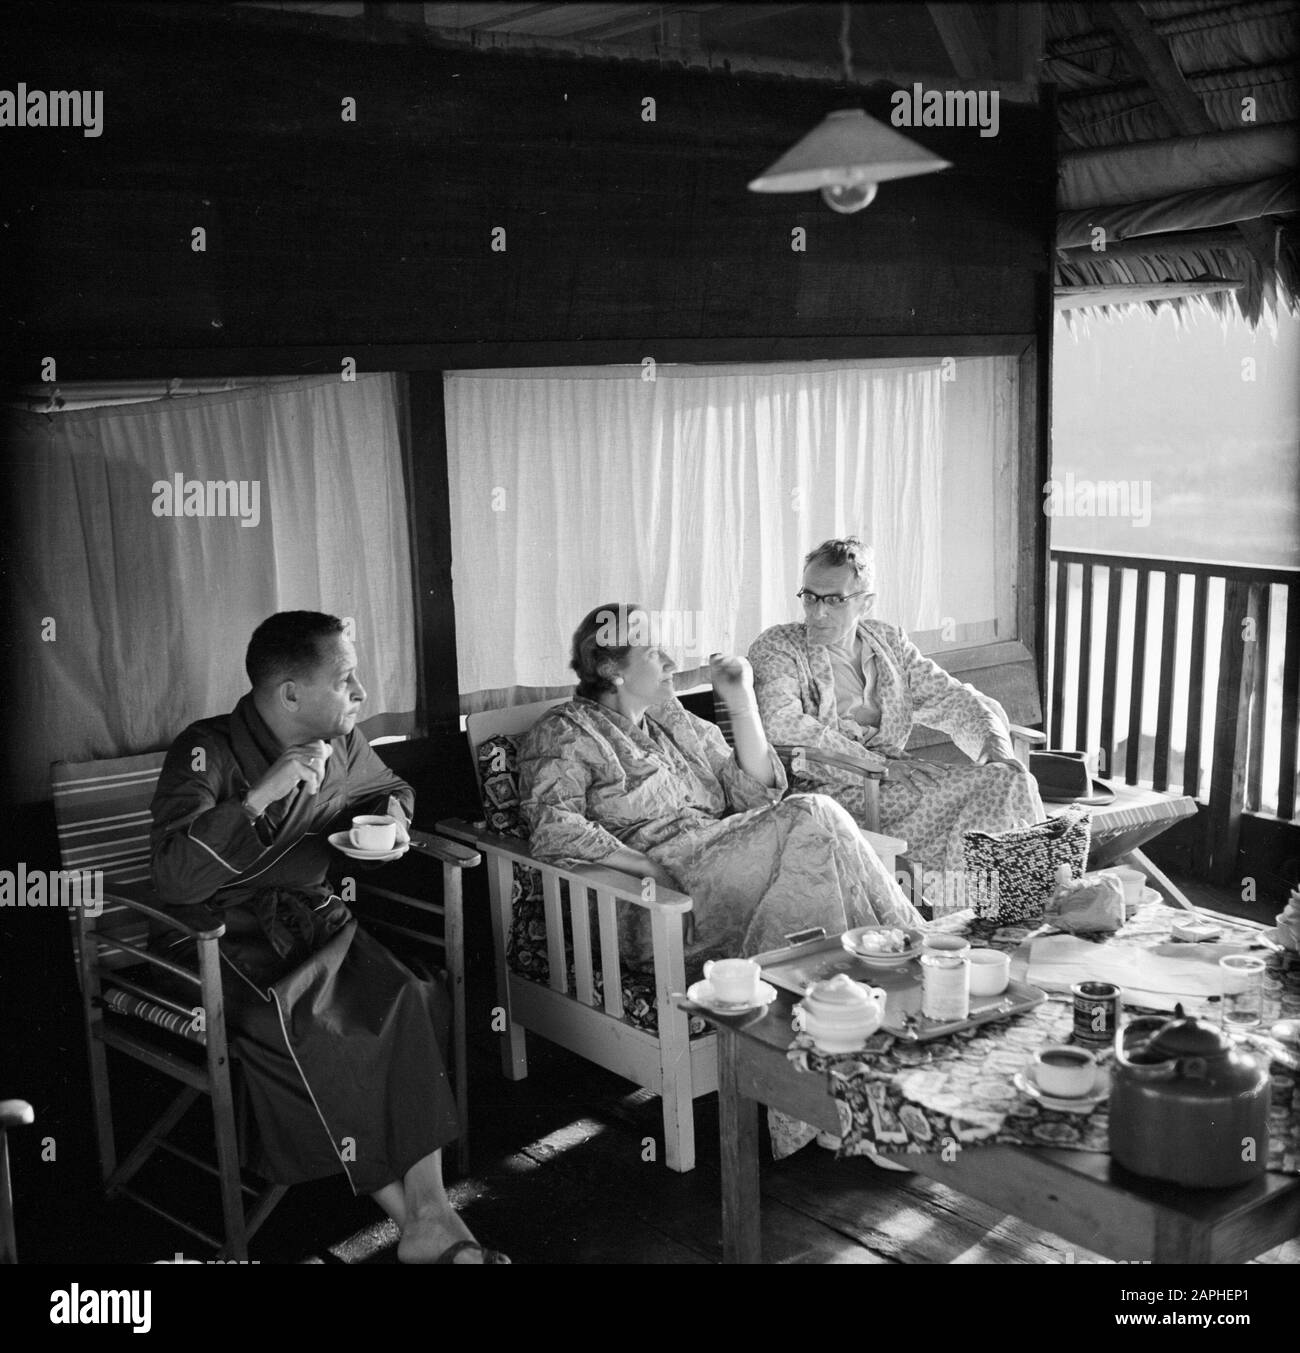 Dutch Antilles and Suriname at the time of the royal visit of Queen Juliana and Prince Bernhard in 1955 Description: Mr. Van Zuylen with Jo de Greve on the porch of the guest house in Brokopondo Date: October 1, 1955 Location: Brokopondo, Suriname Keywords: dwellings Personal name: Greve, Jo de, Zuylen, L. van Stock Photo